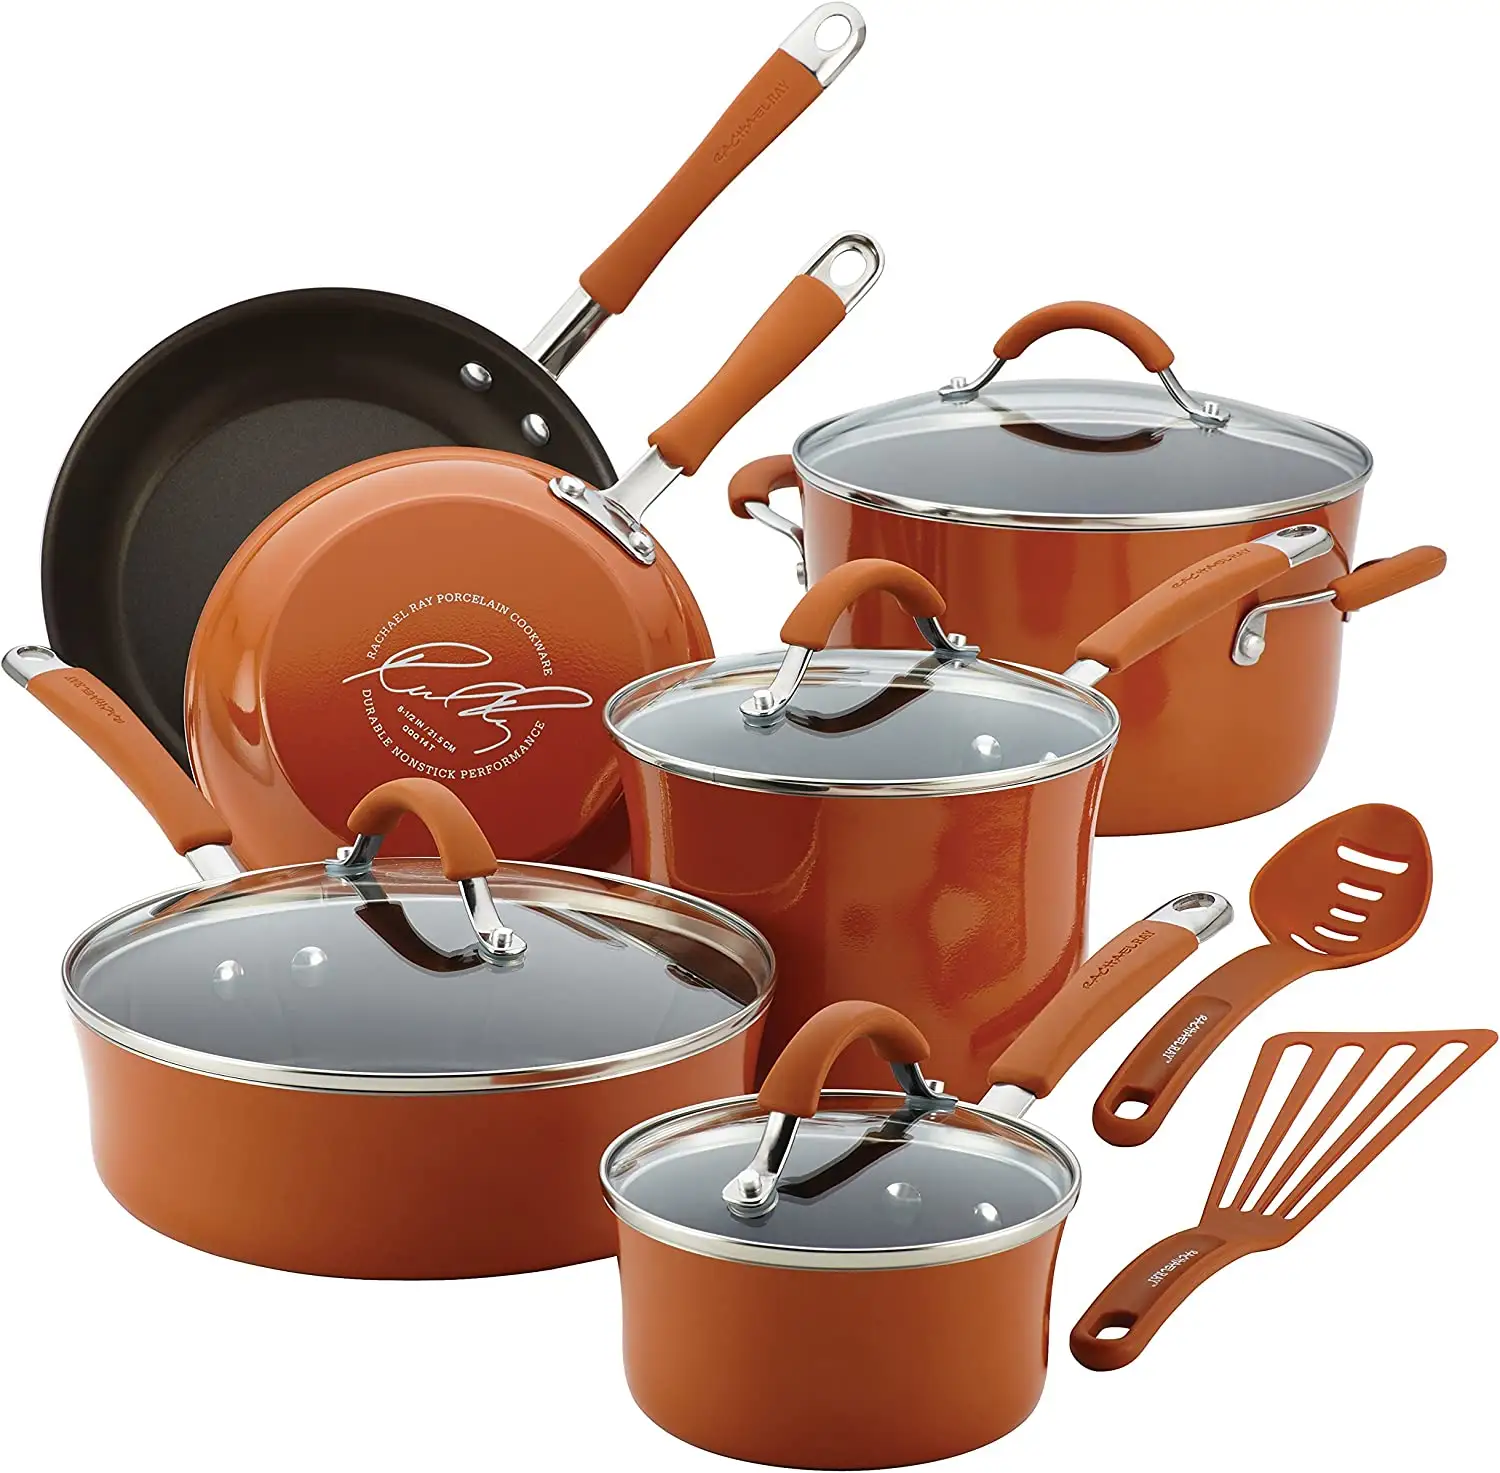 Cookware Set dropshipping agent Pots and Pans Set Cooking Ware with Stockpot Saucepan Saute Fry Pan with Lids Kitchenware Set